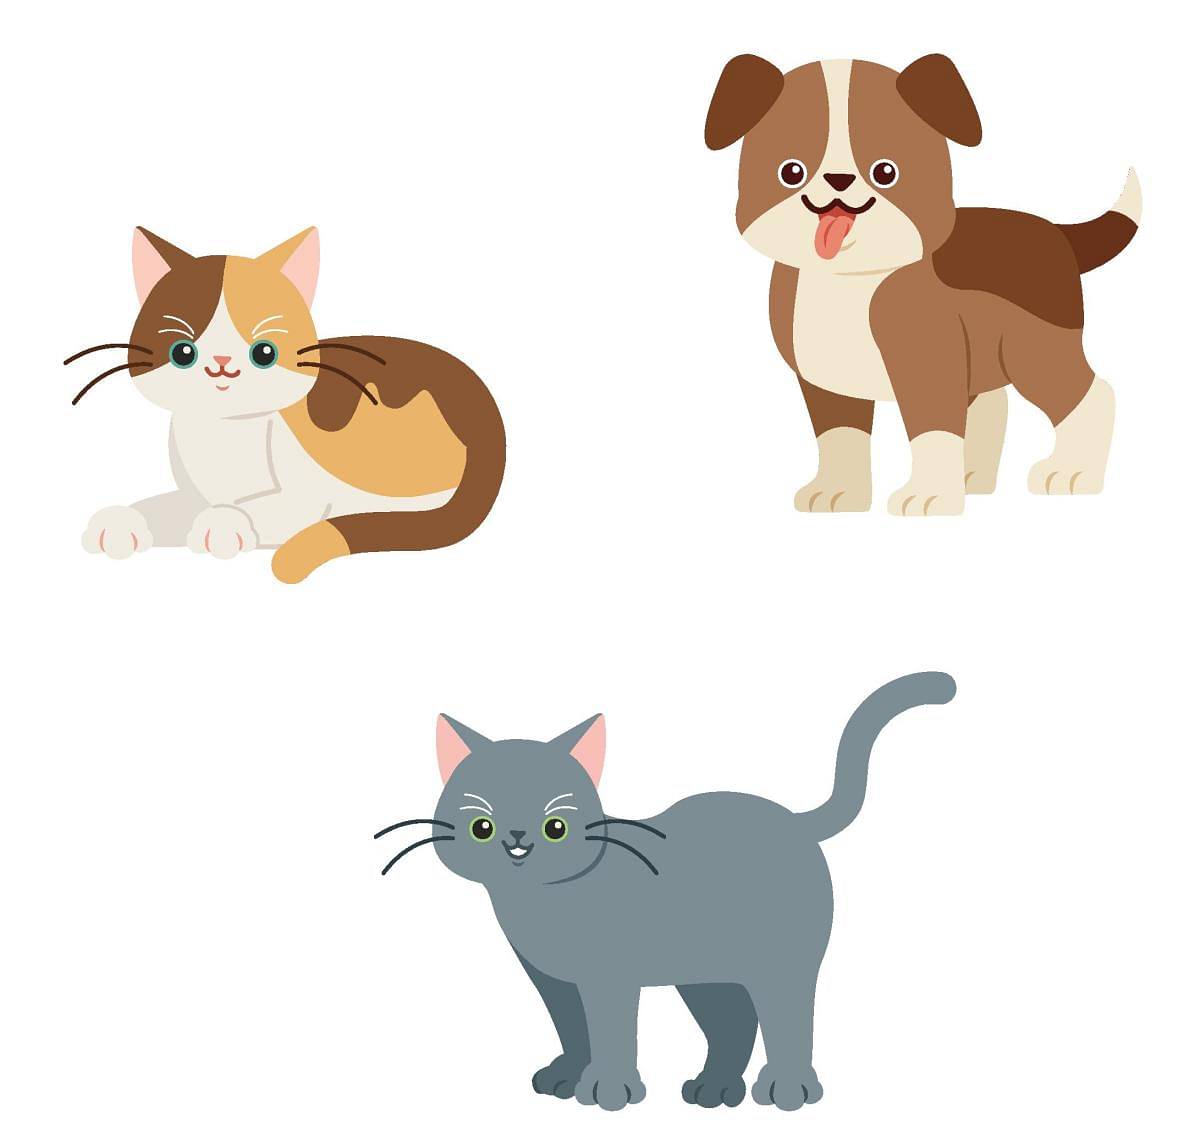 Talk it out: Cats vs dogs